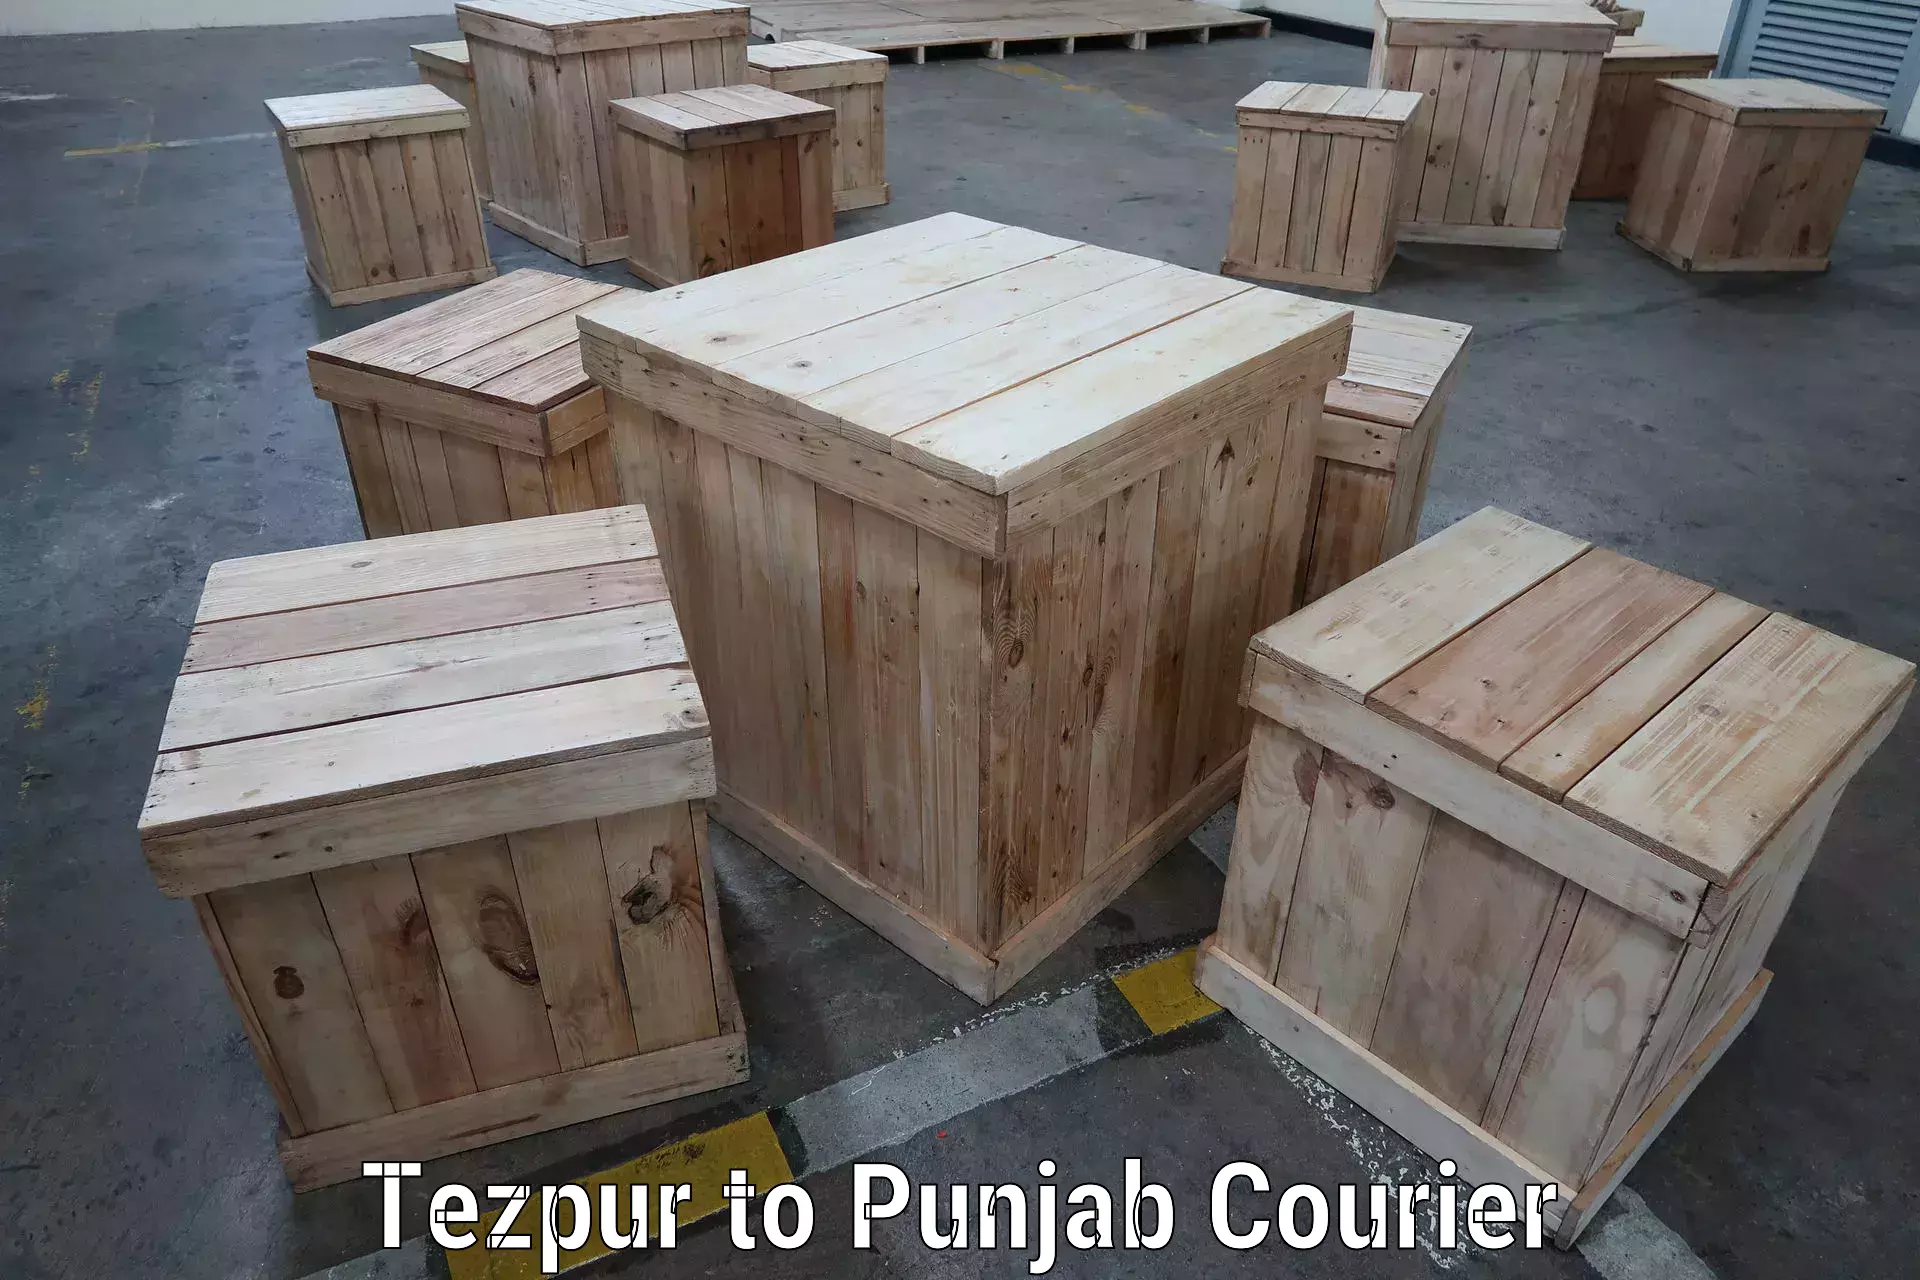 Package delivery network Tezpur to Goindwal Sahib